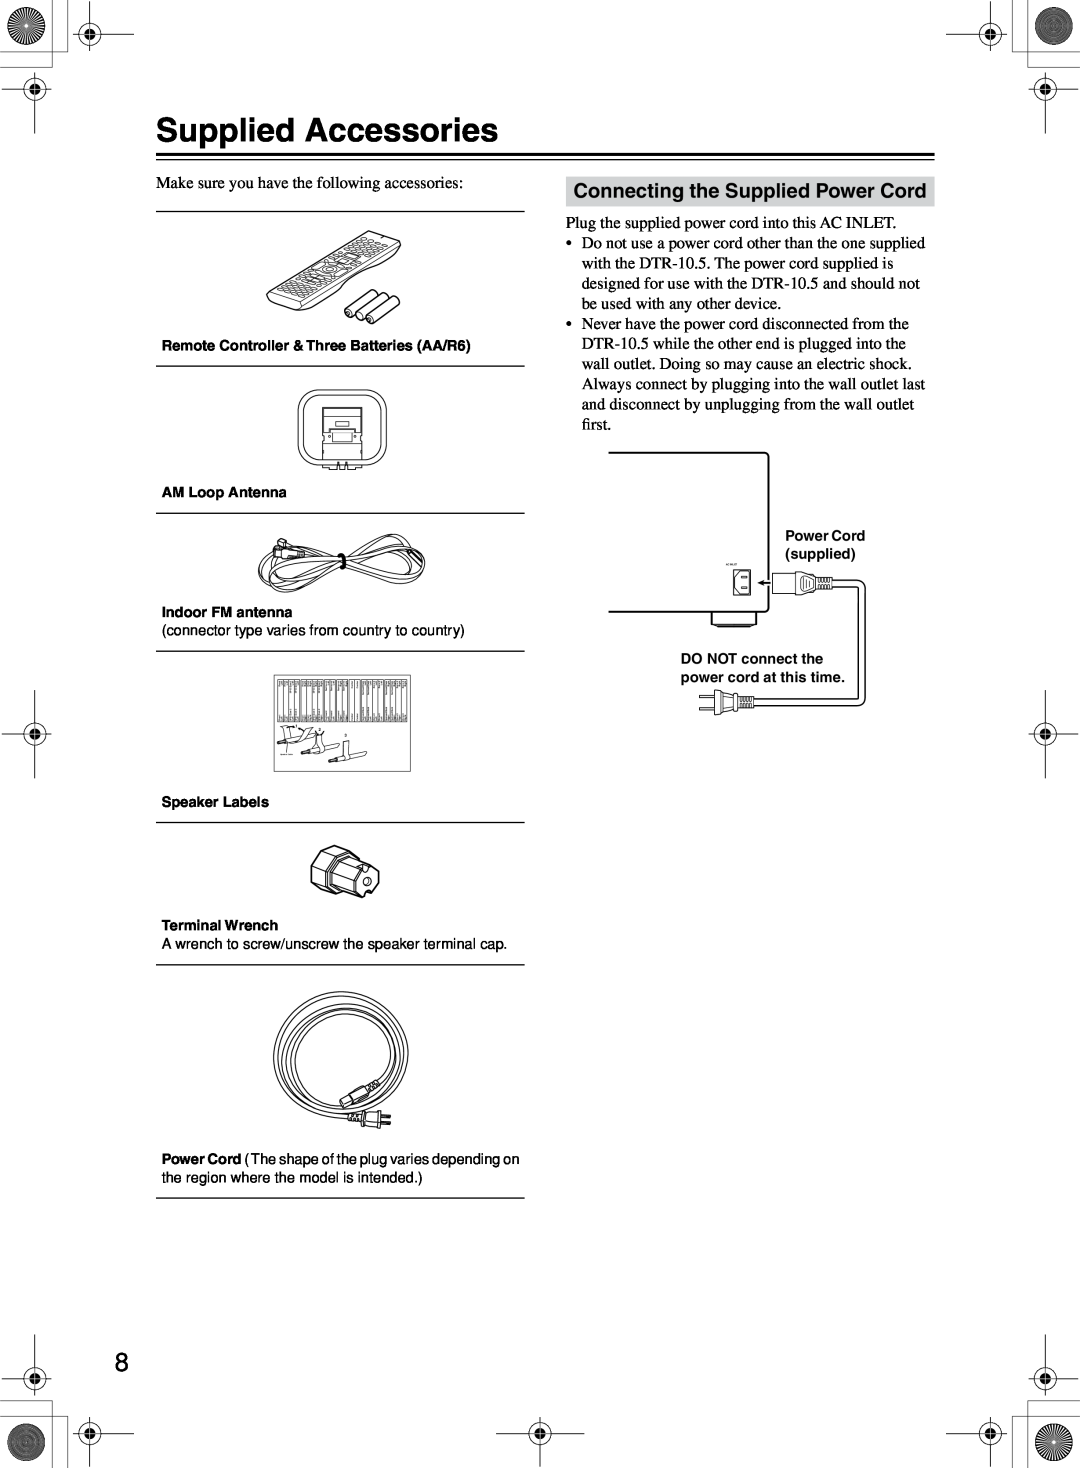 Integra DTR-10.5 instruction manual Supplied Accessories, Connecting the Supplied Power Cord 